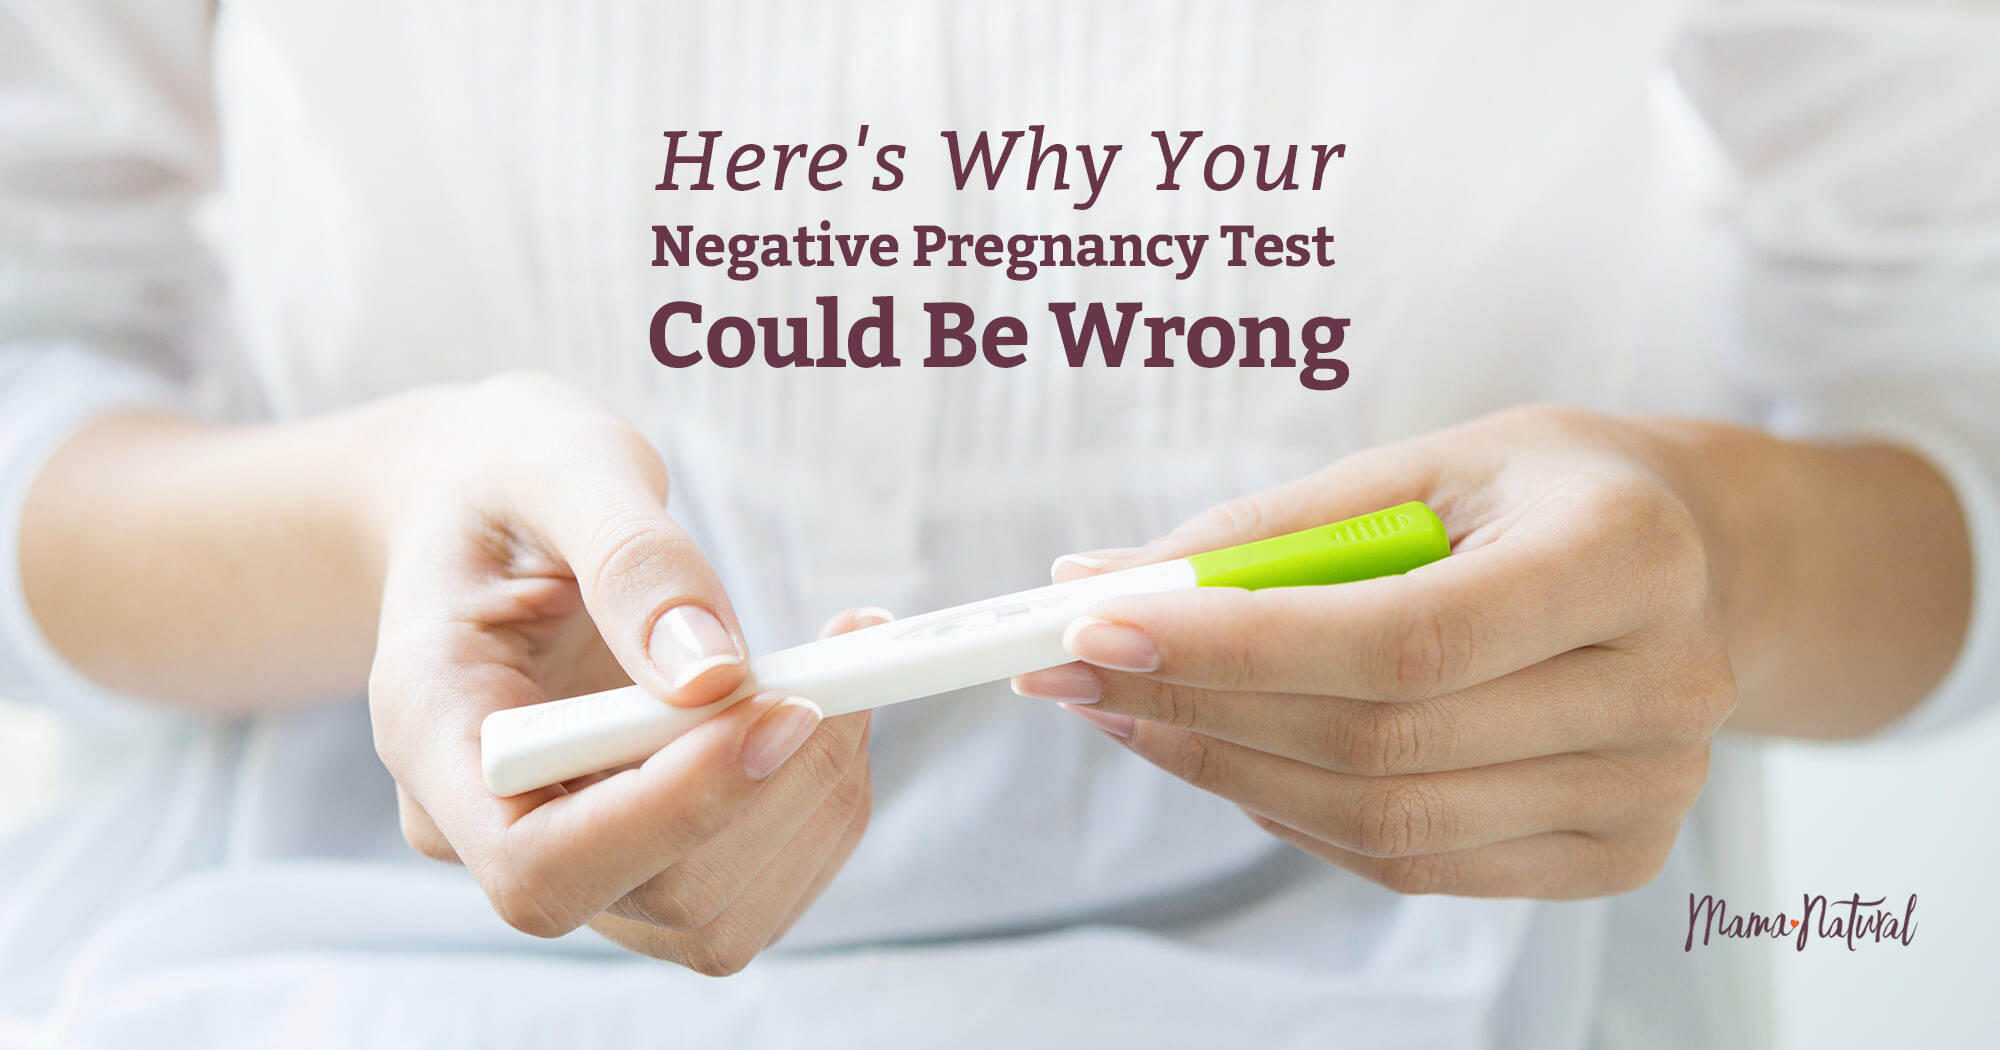 Can a Negative Pregnancy Test Be Wrong? - Mama Natural